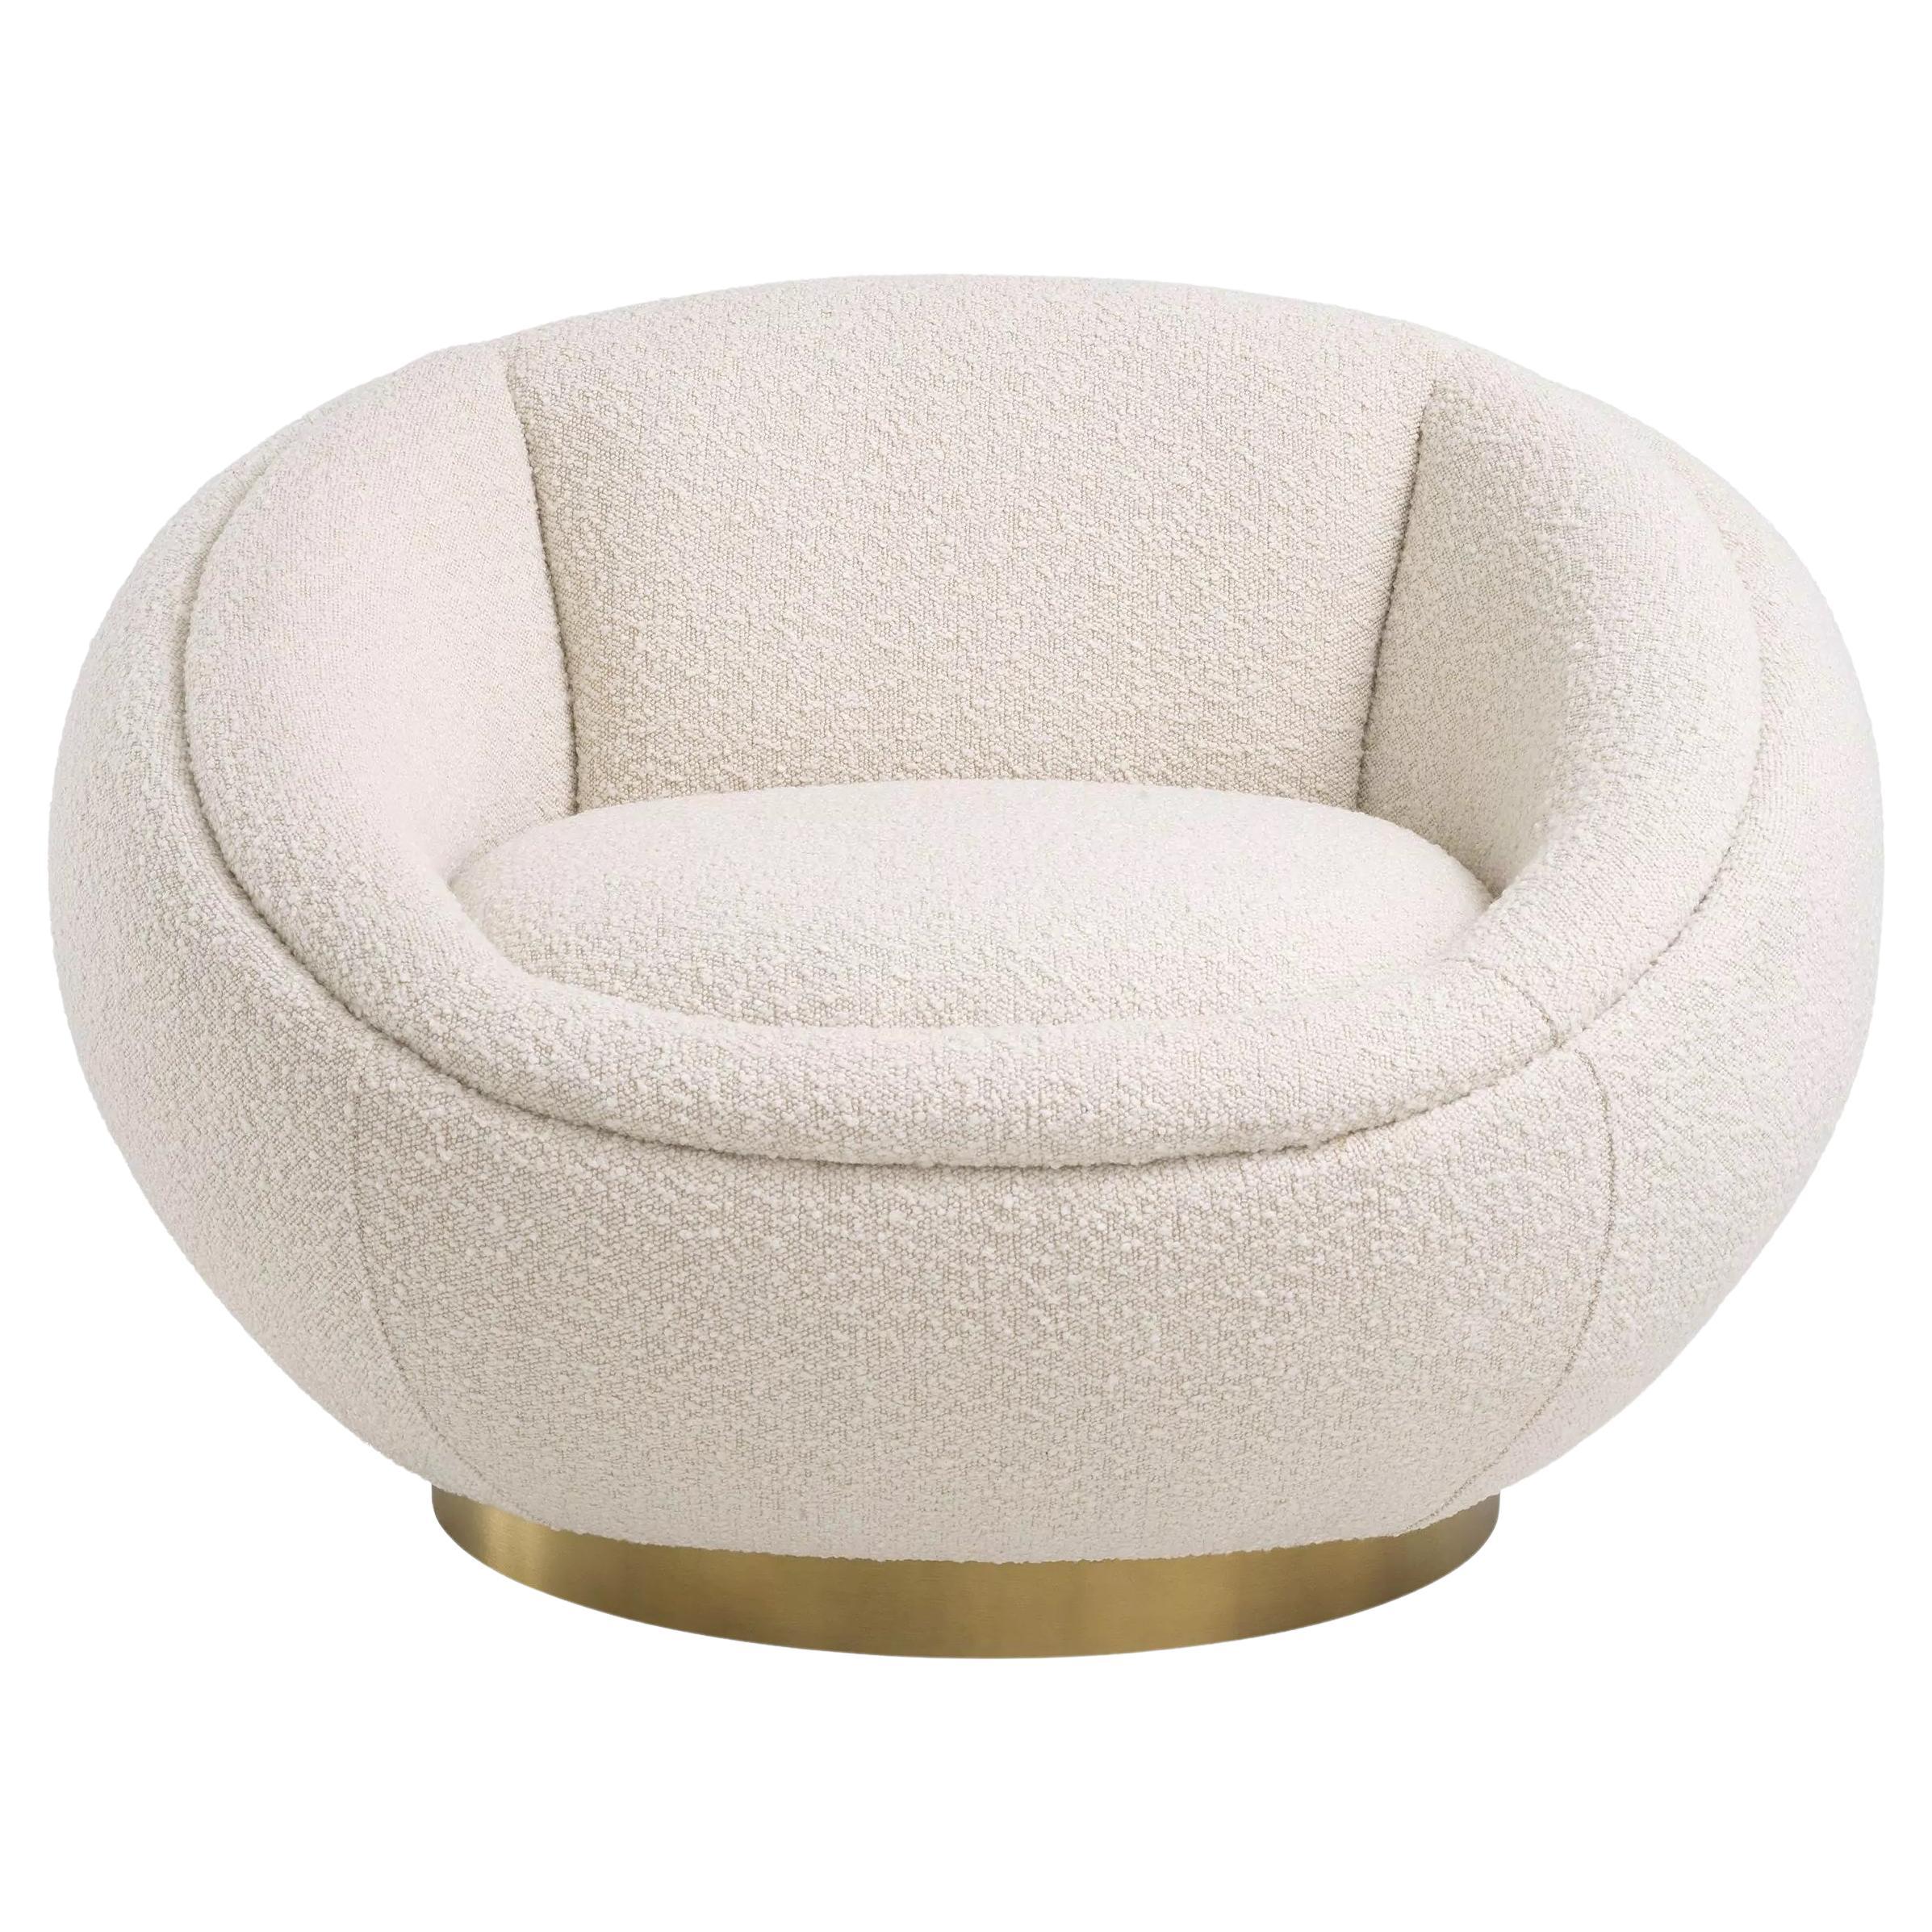 Beige Bouclé Fabric and Brass Finishes Swivel Armchair